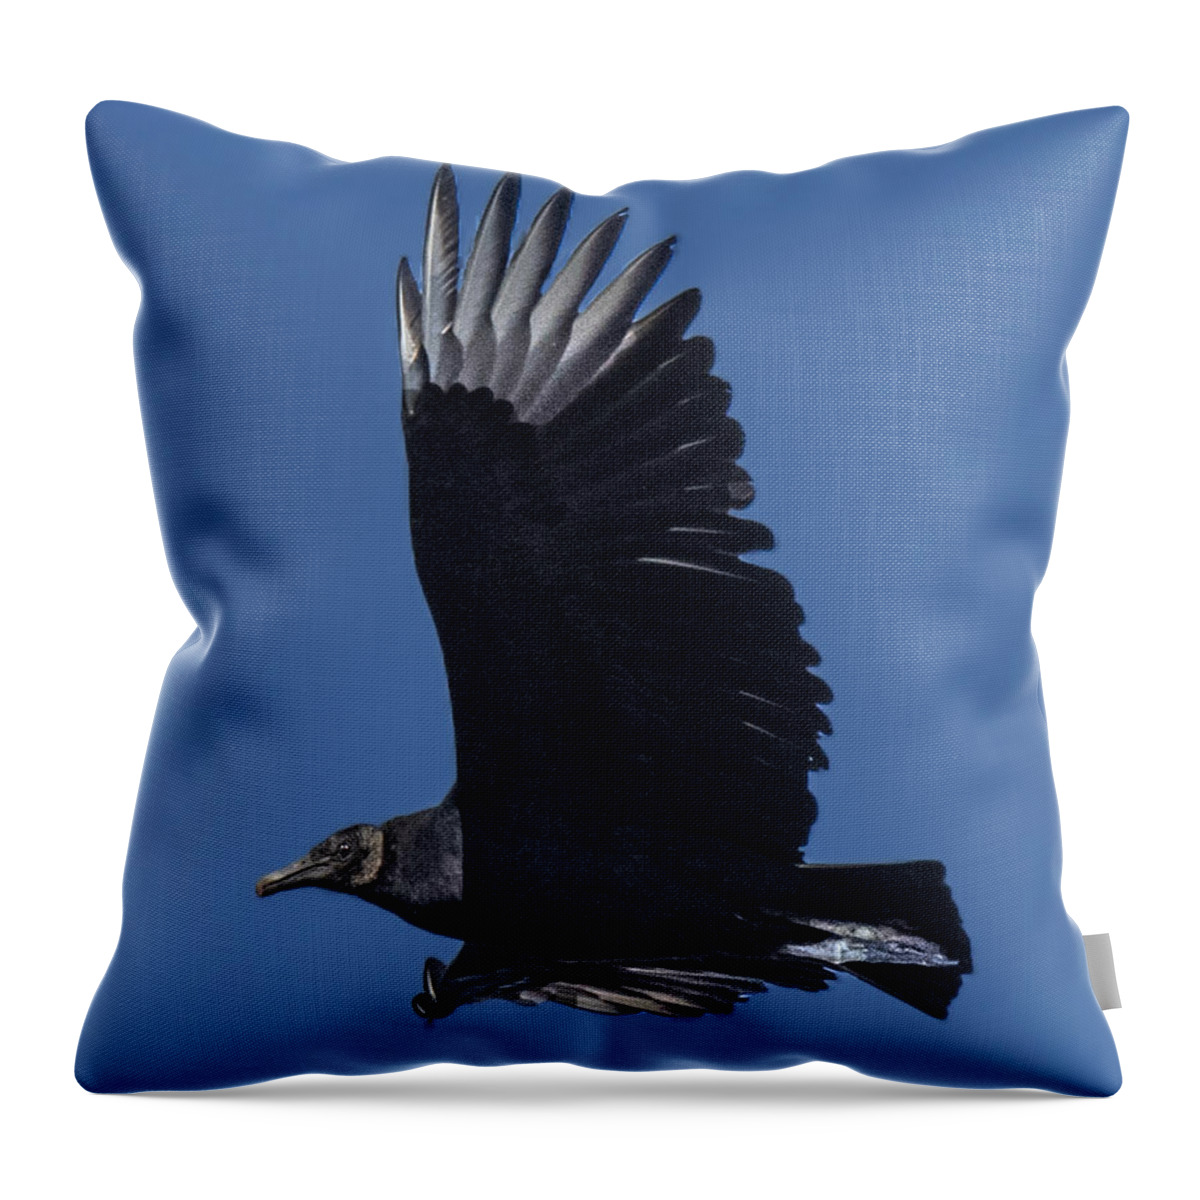 Vulture Throw Pillow featuring the photograph Black Vulture Flying Profile by William Bitman